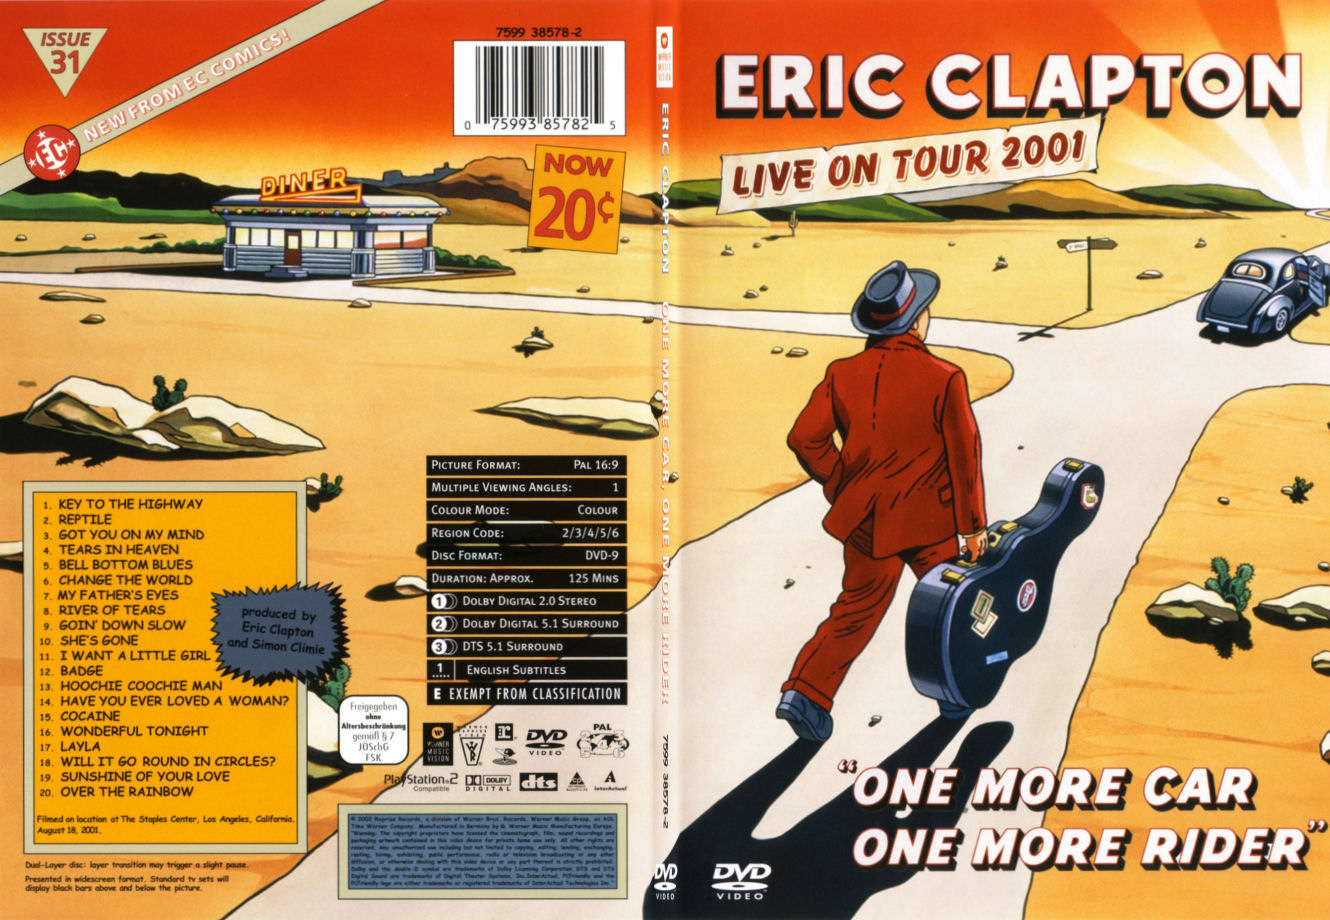 Jaquette DVD Eric Clapton - One more car one more rider - SLIM